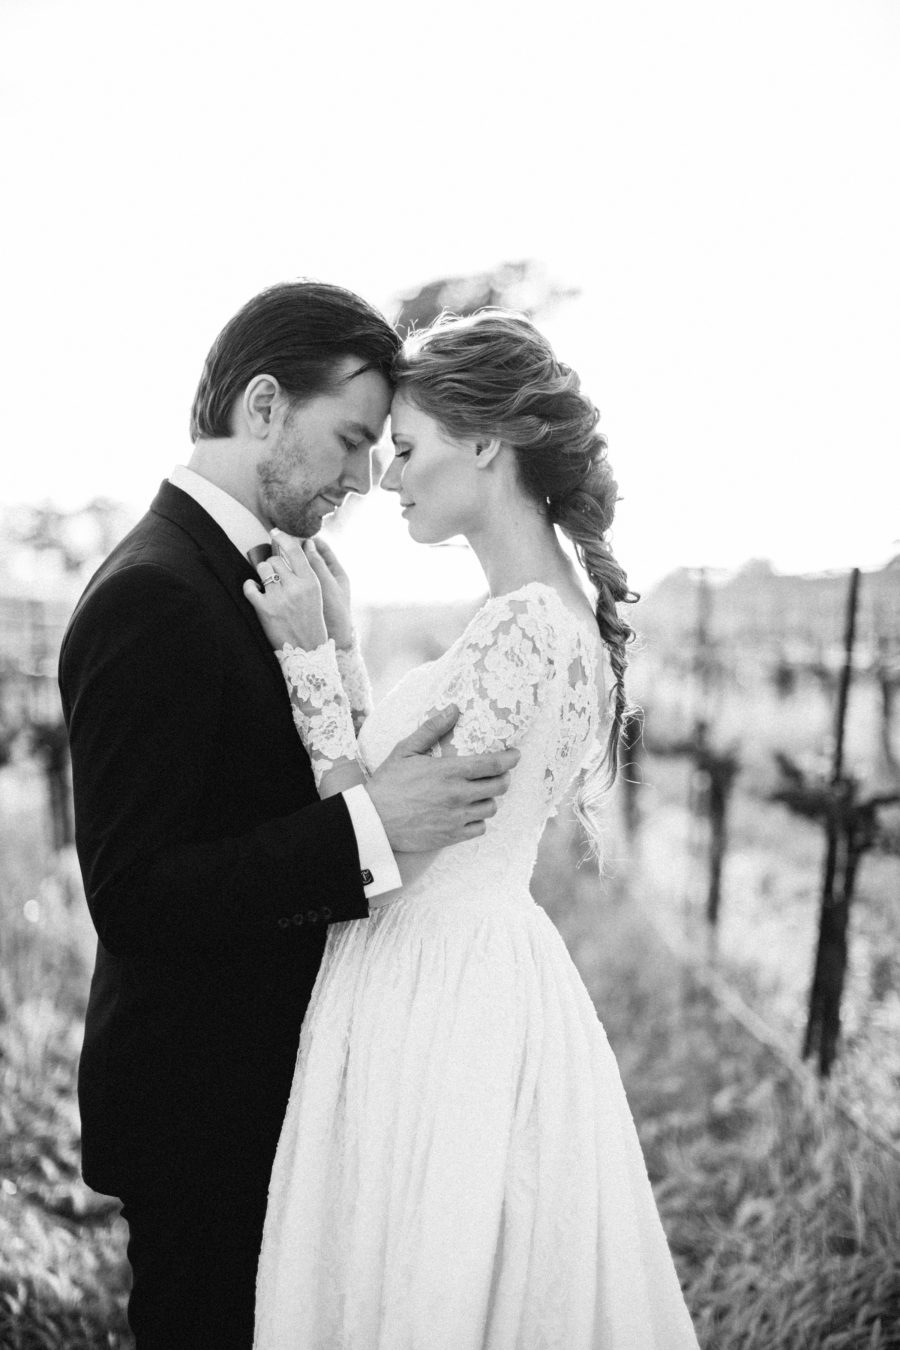 Miss USA 2011 Alyssa Campanella and Reign's Torrance Coombs Wedding Day featured in The Knot at Sunstone Villa